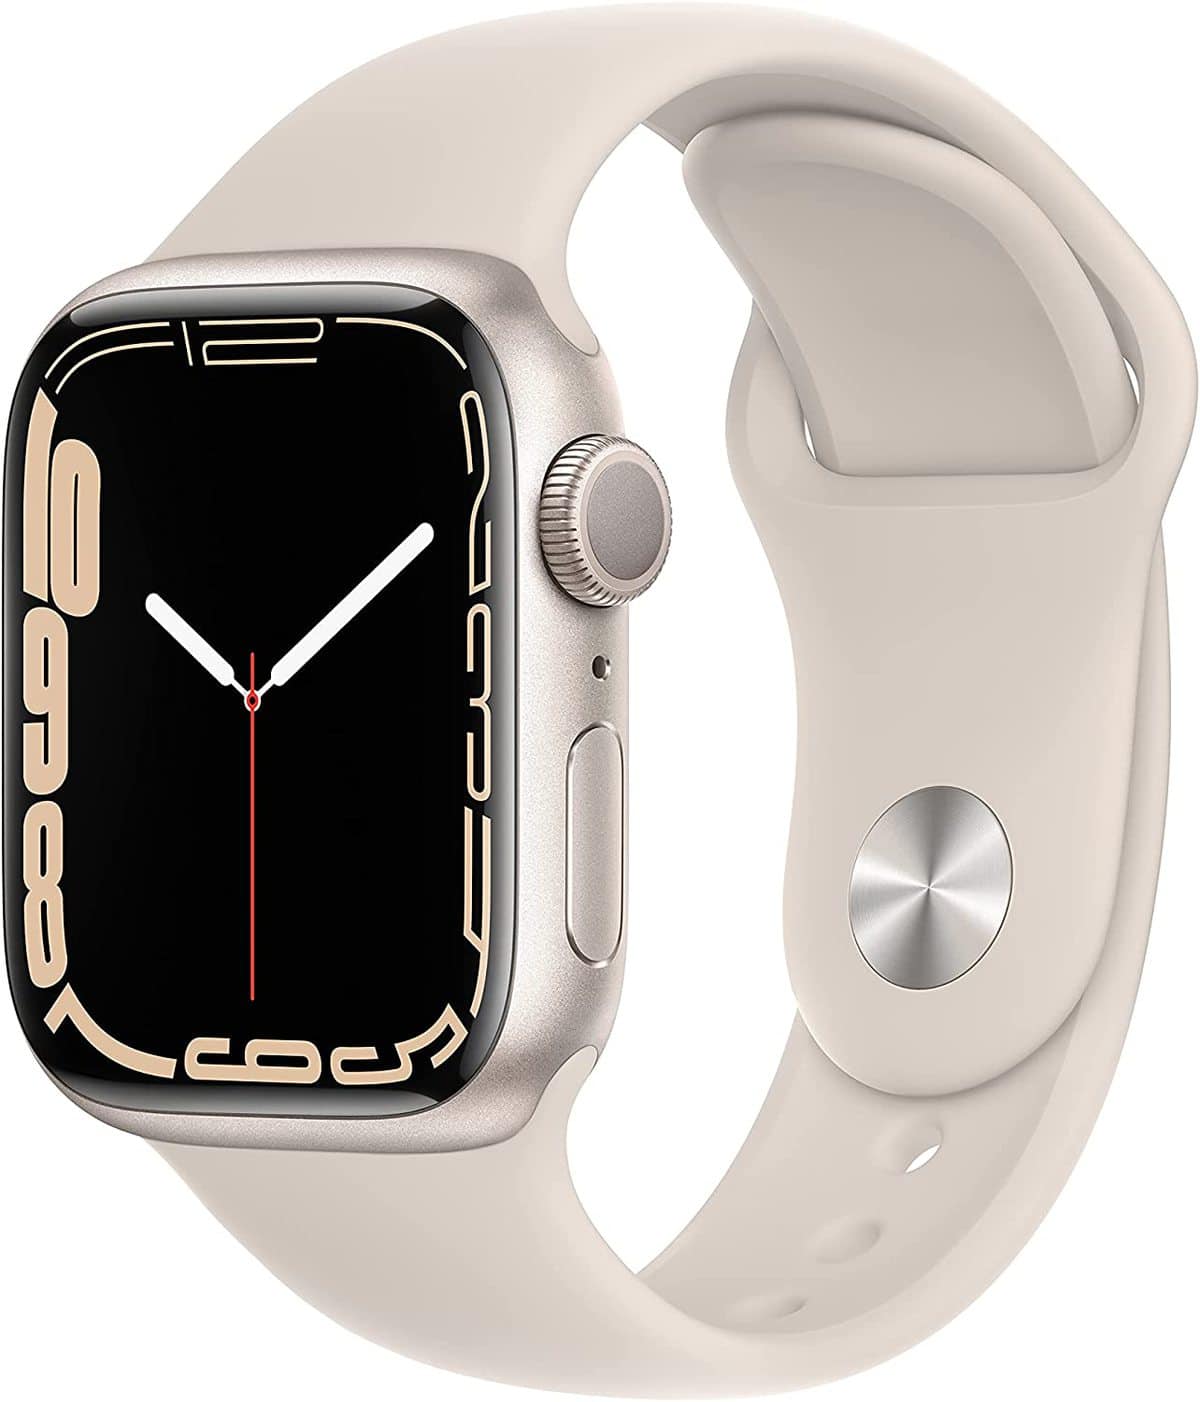 White Apple watch showing an analog face